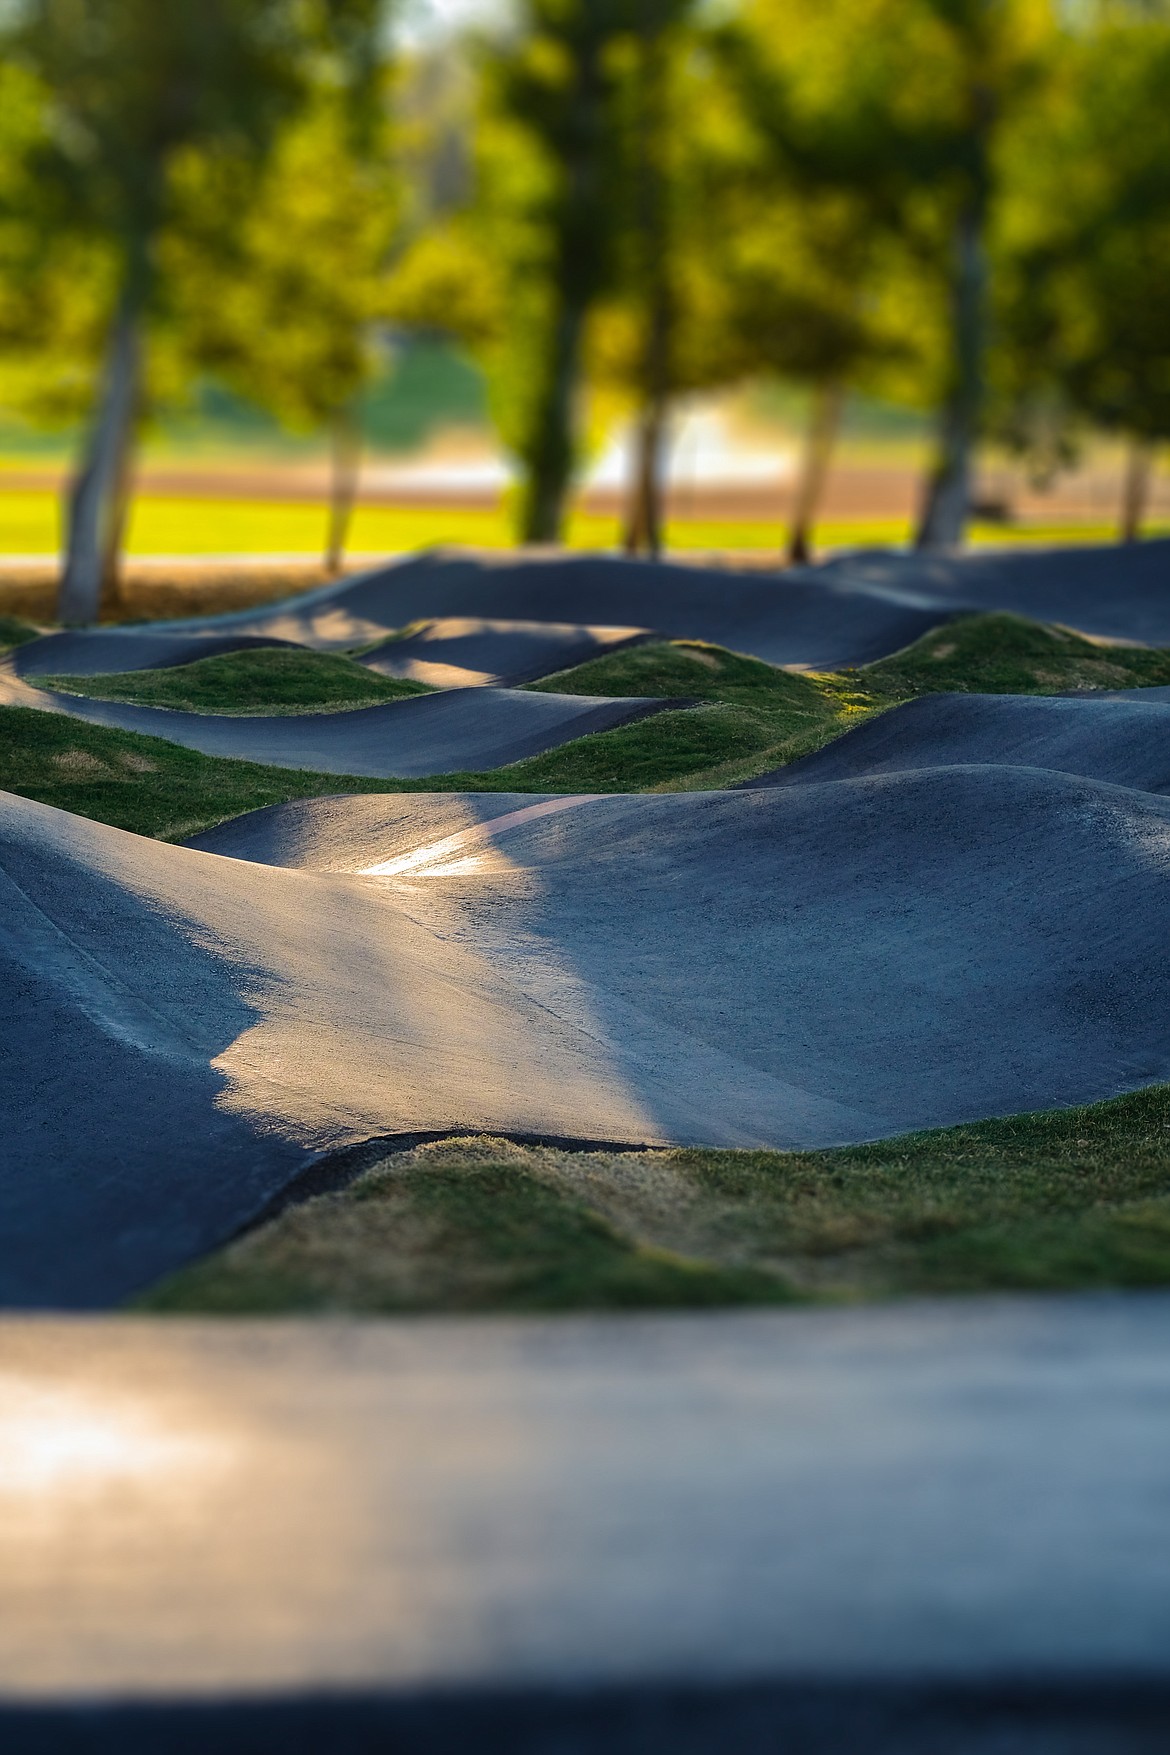 The city of Quincy is looking to expand recreational options with a pump park similar to the one pictured above. A pump park uses hills and other landscaping fixtures to provide cyclists, scooter riders and skateboarders a course that allows them to continually move without pedaling or kicking.